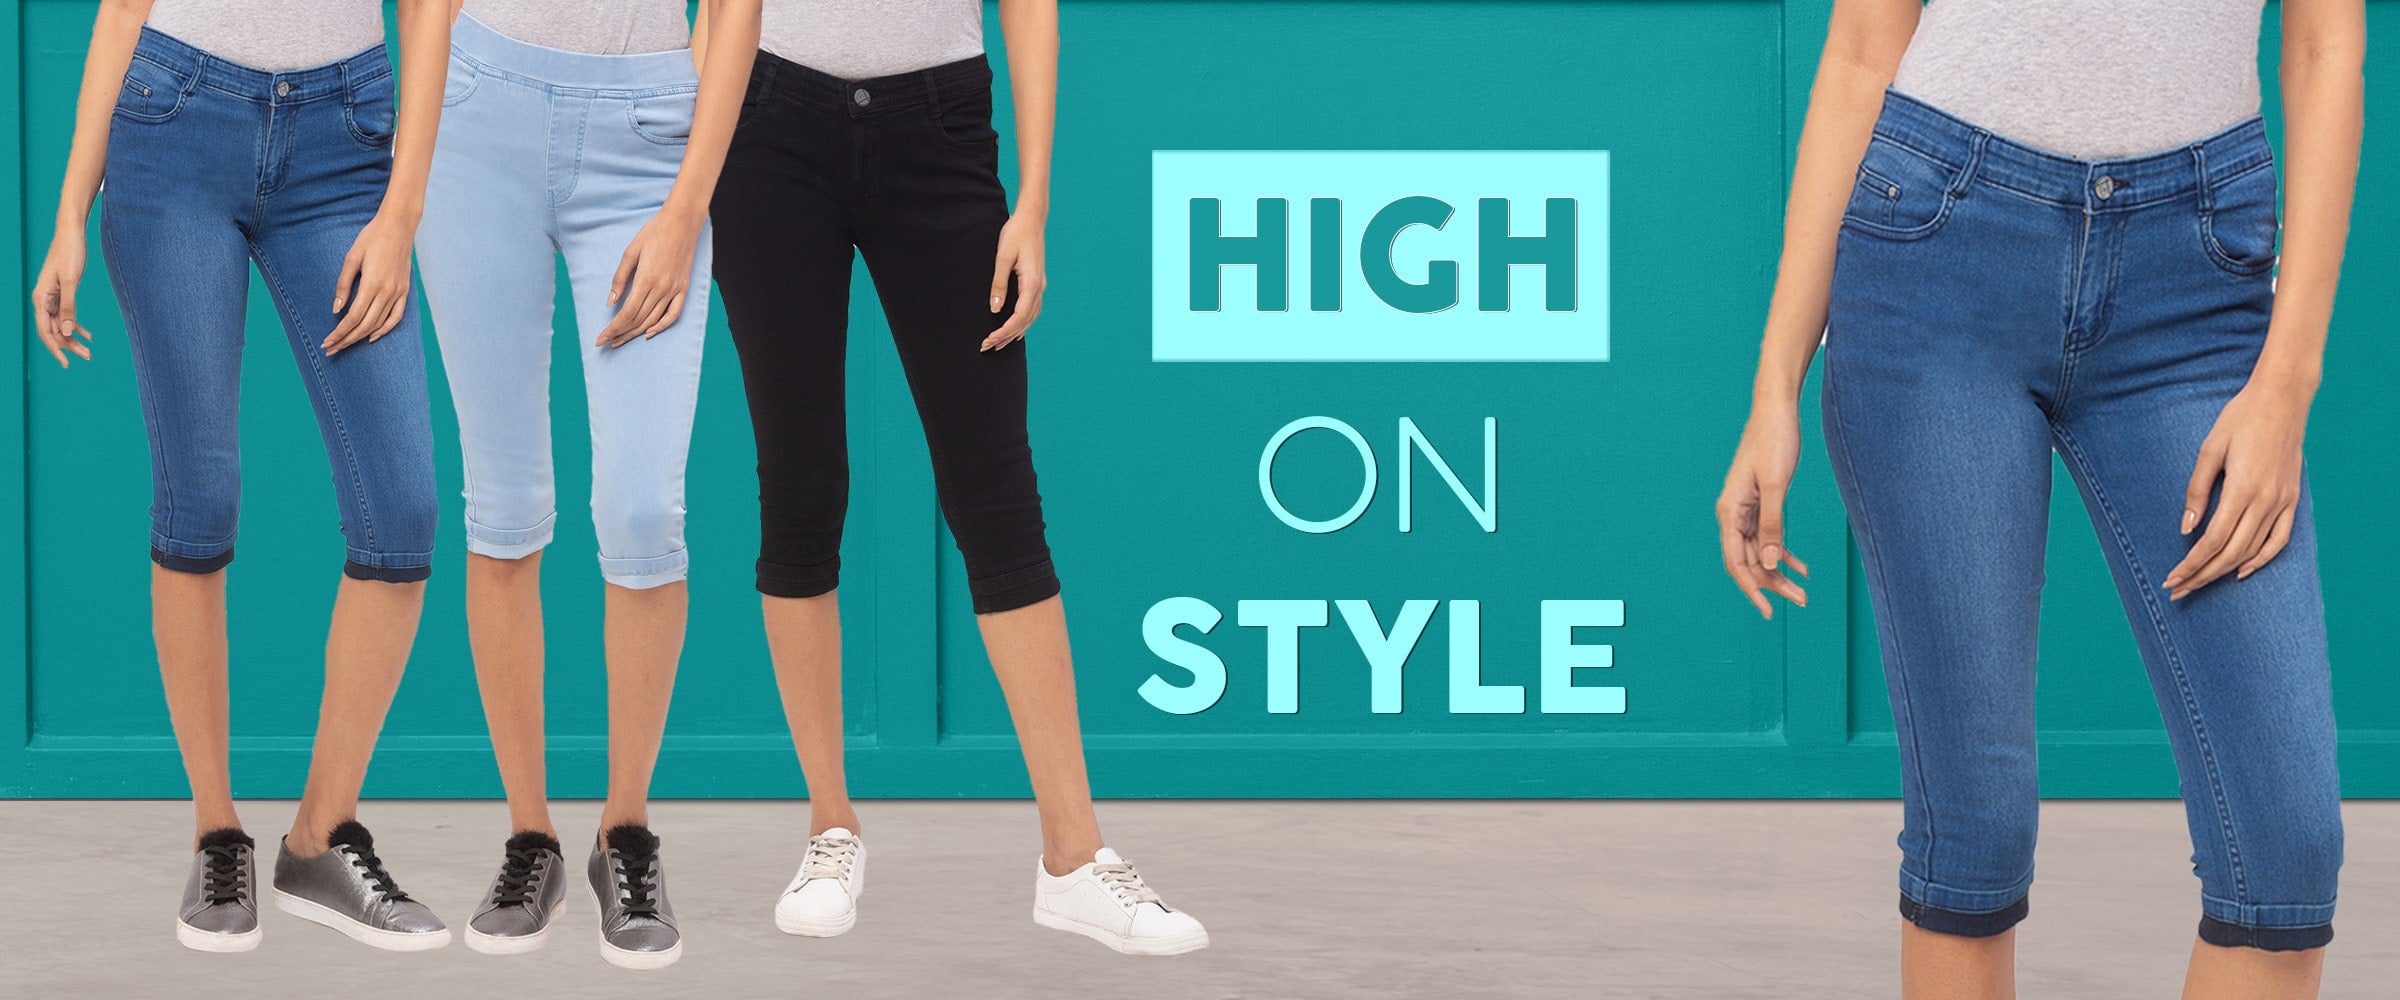 How to wear capris or cropped pants - your complete guide  Capri outfits, Cropped  pants outfit, Capri pants outfits